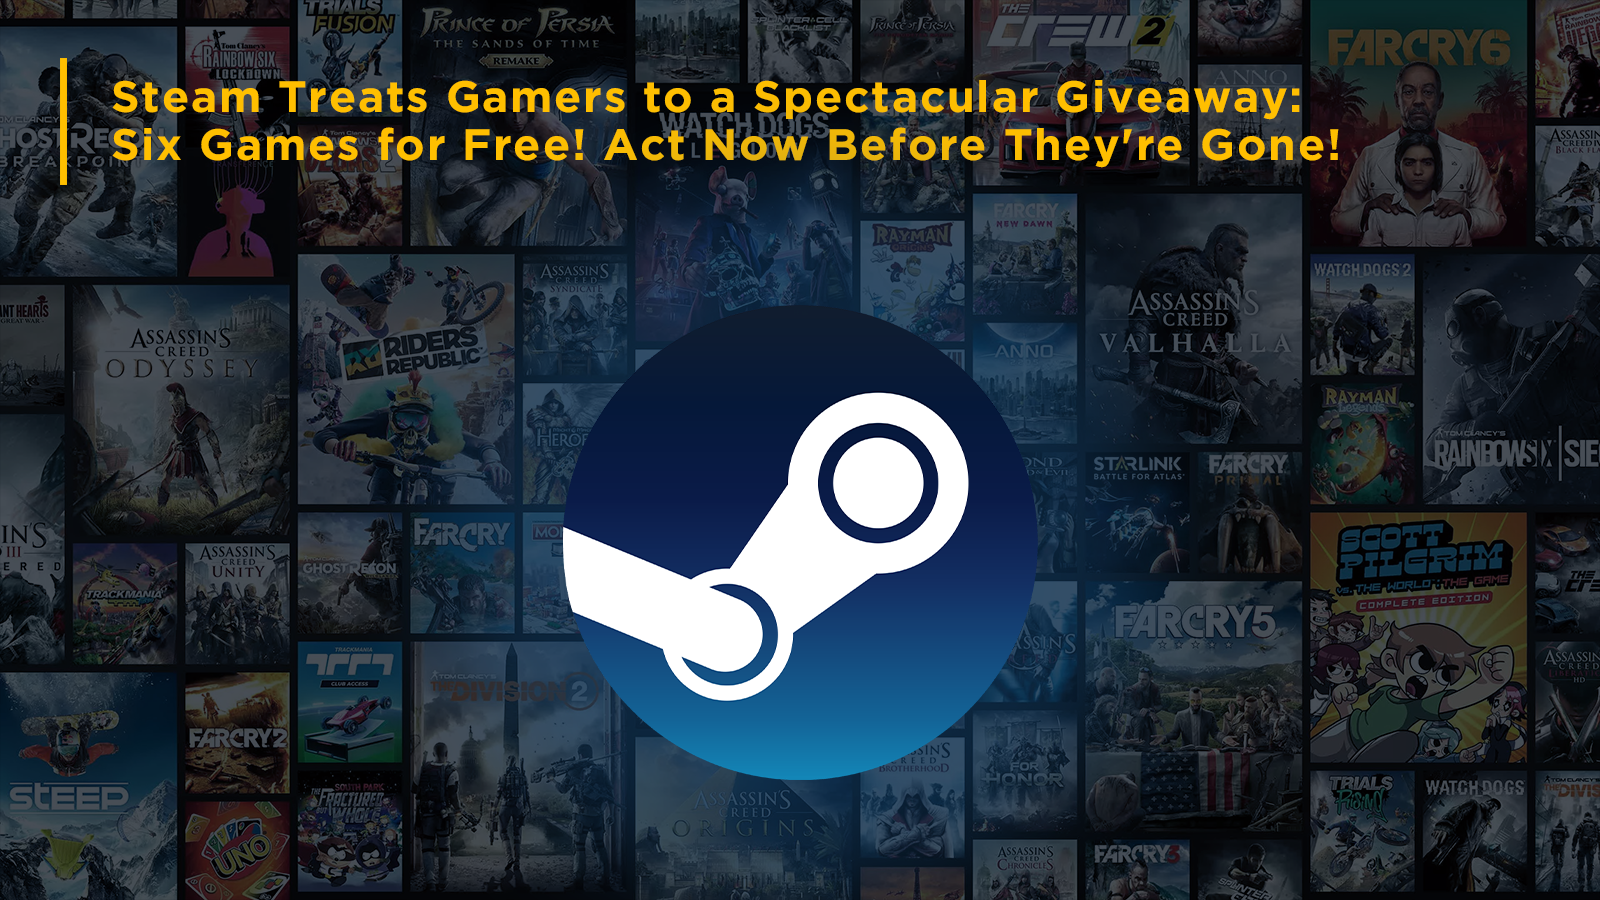 Steam Treats Gamers to a Spectacular Giveaway: 6 Games for Free! Act Now Before They’re Gone!